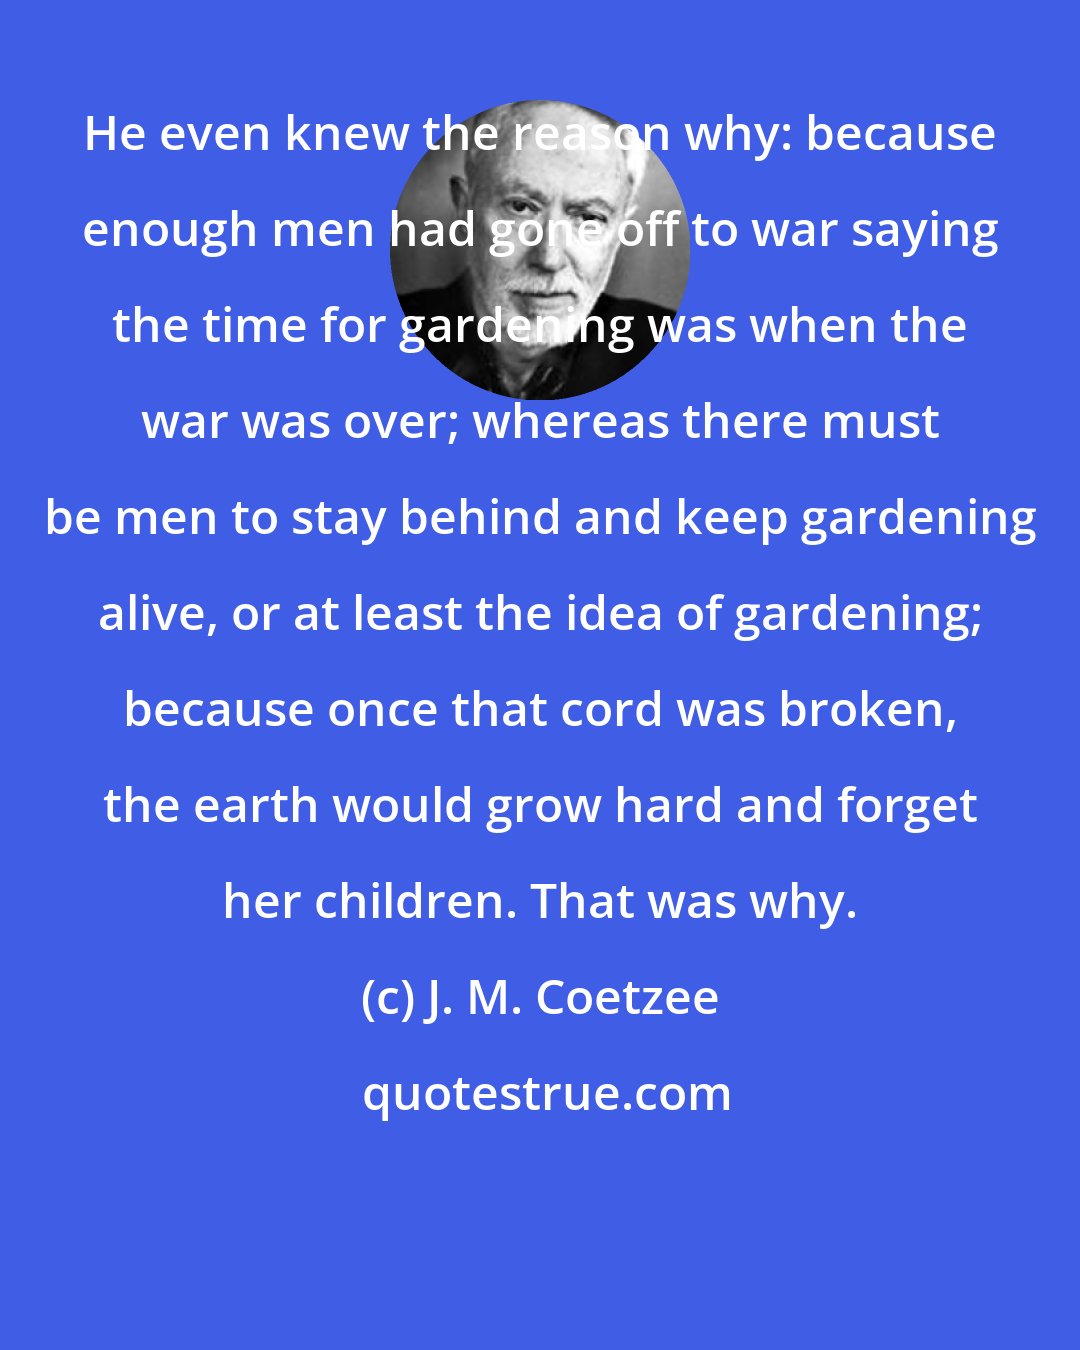 J. M. Coetzee: He even knew the reason why: because enough men had gone off to war saying the time for gardening was when the war was over; whereas there must be men to stay behind and keep gardening alive, or at least the idea of gardening; because once that cord was broken, the earth would grow hard and forget her children. That was why.